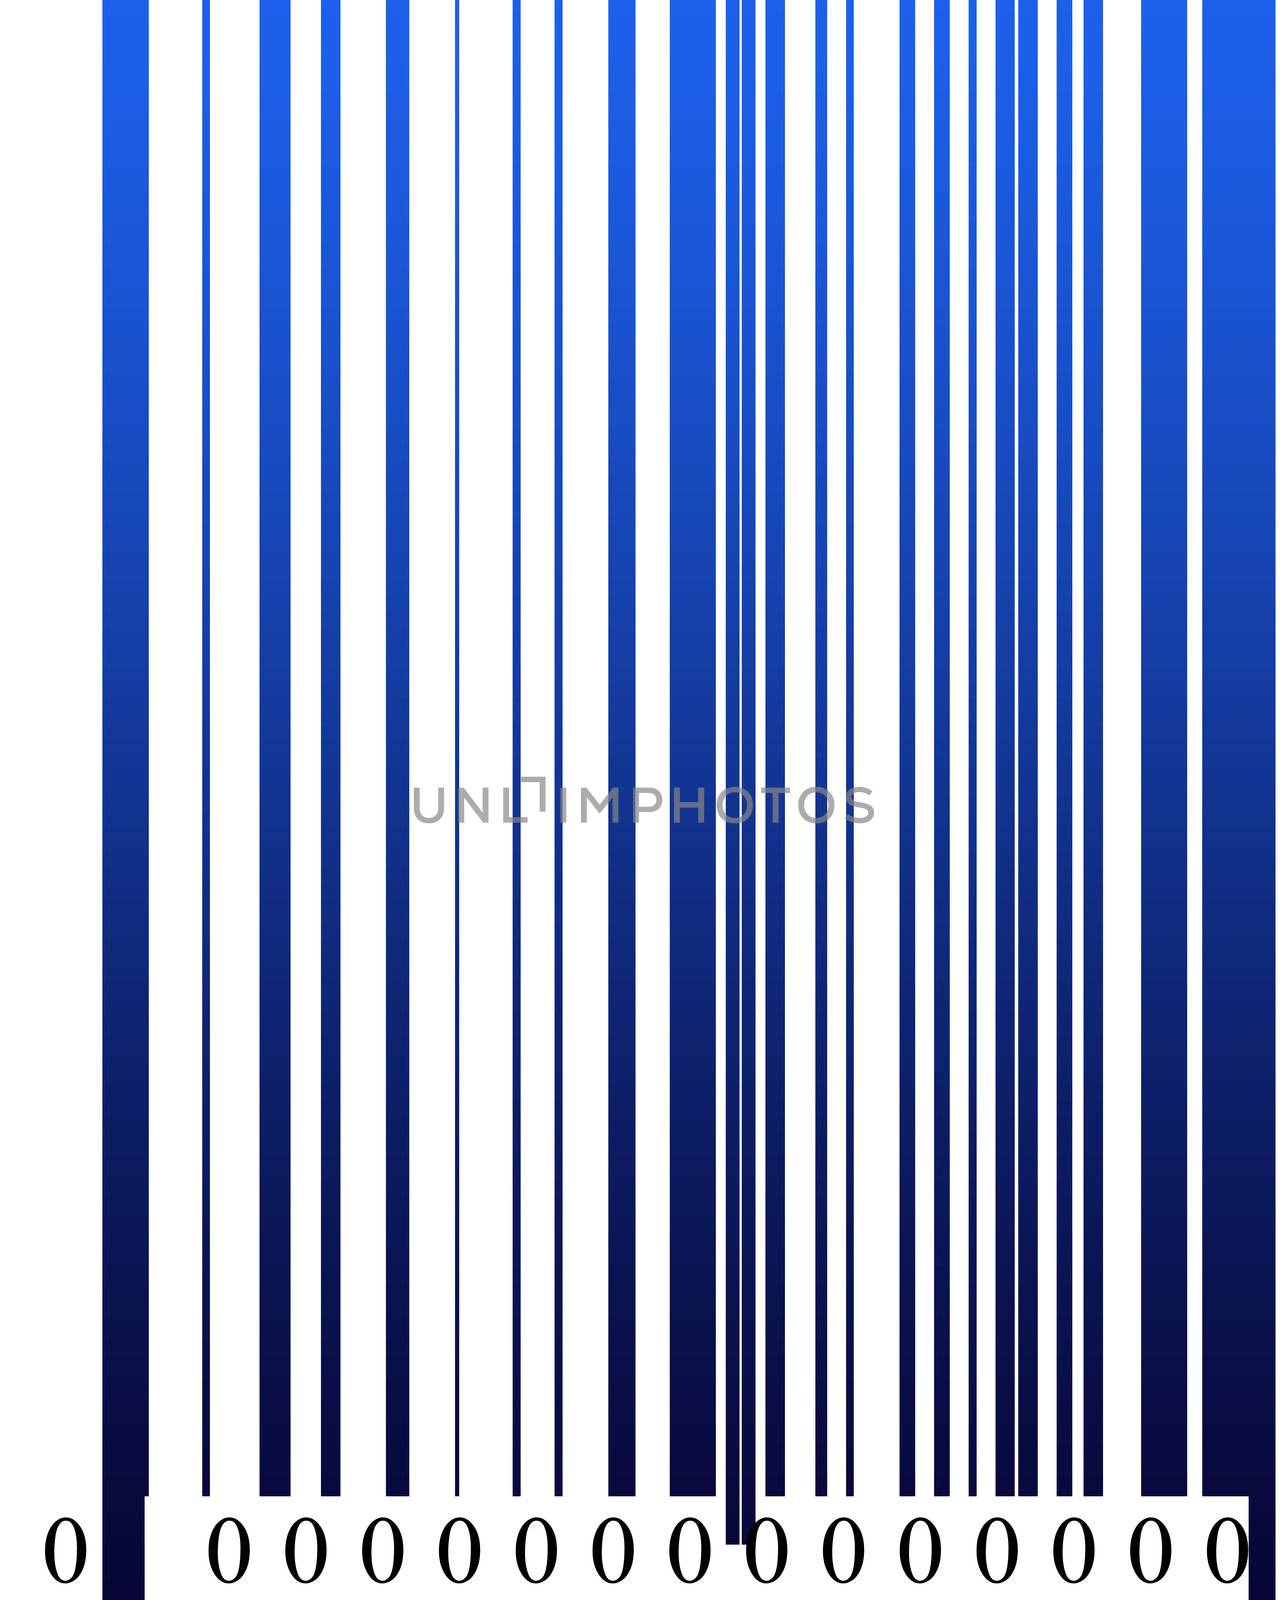 Barcode in all zero numbers. by sacatani